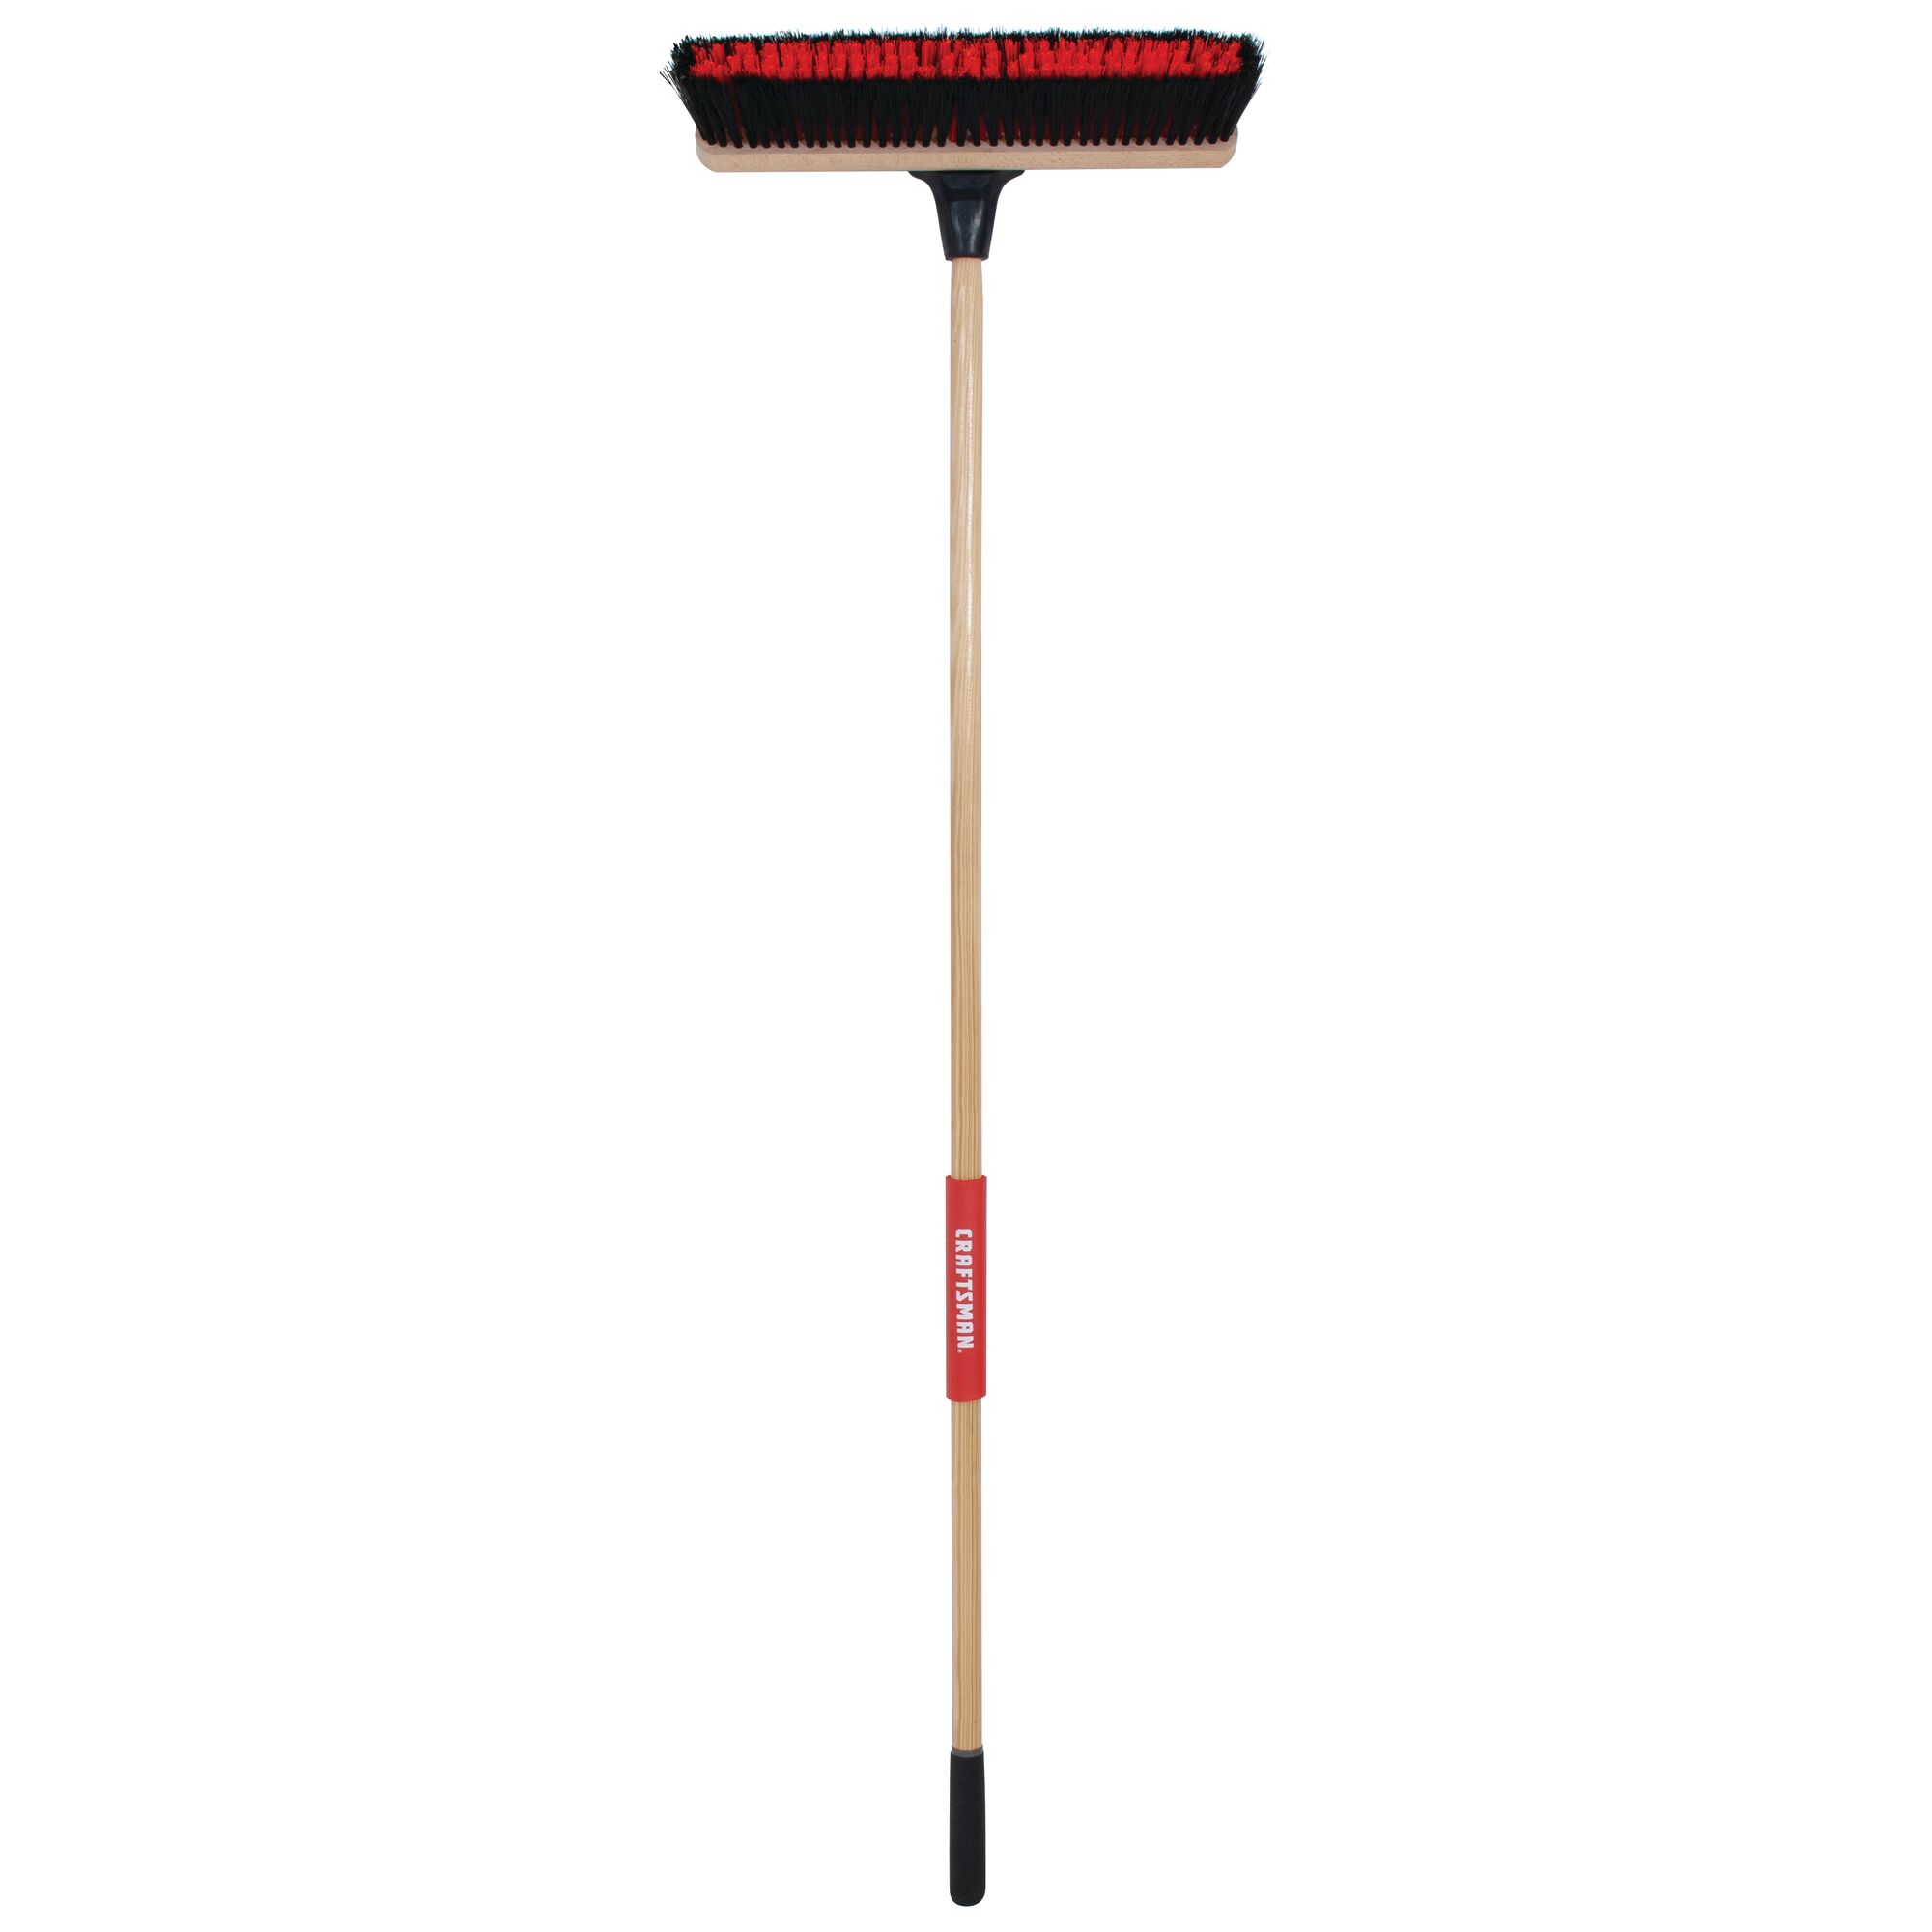 View of CRAFTSMAN Cleaning: Brooms on white background